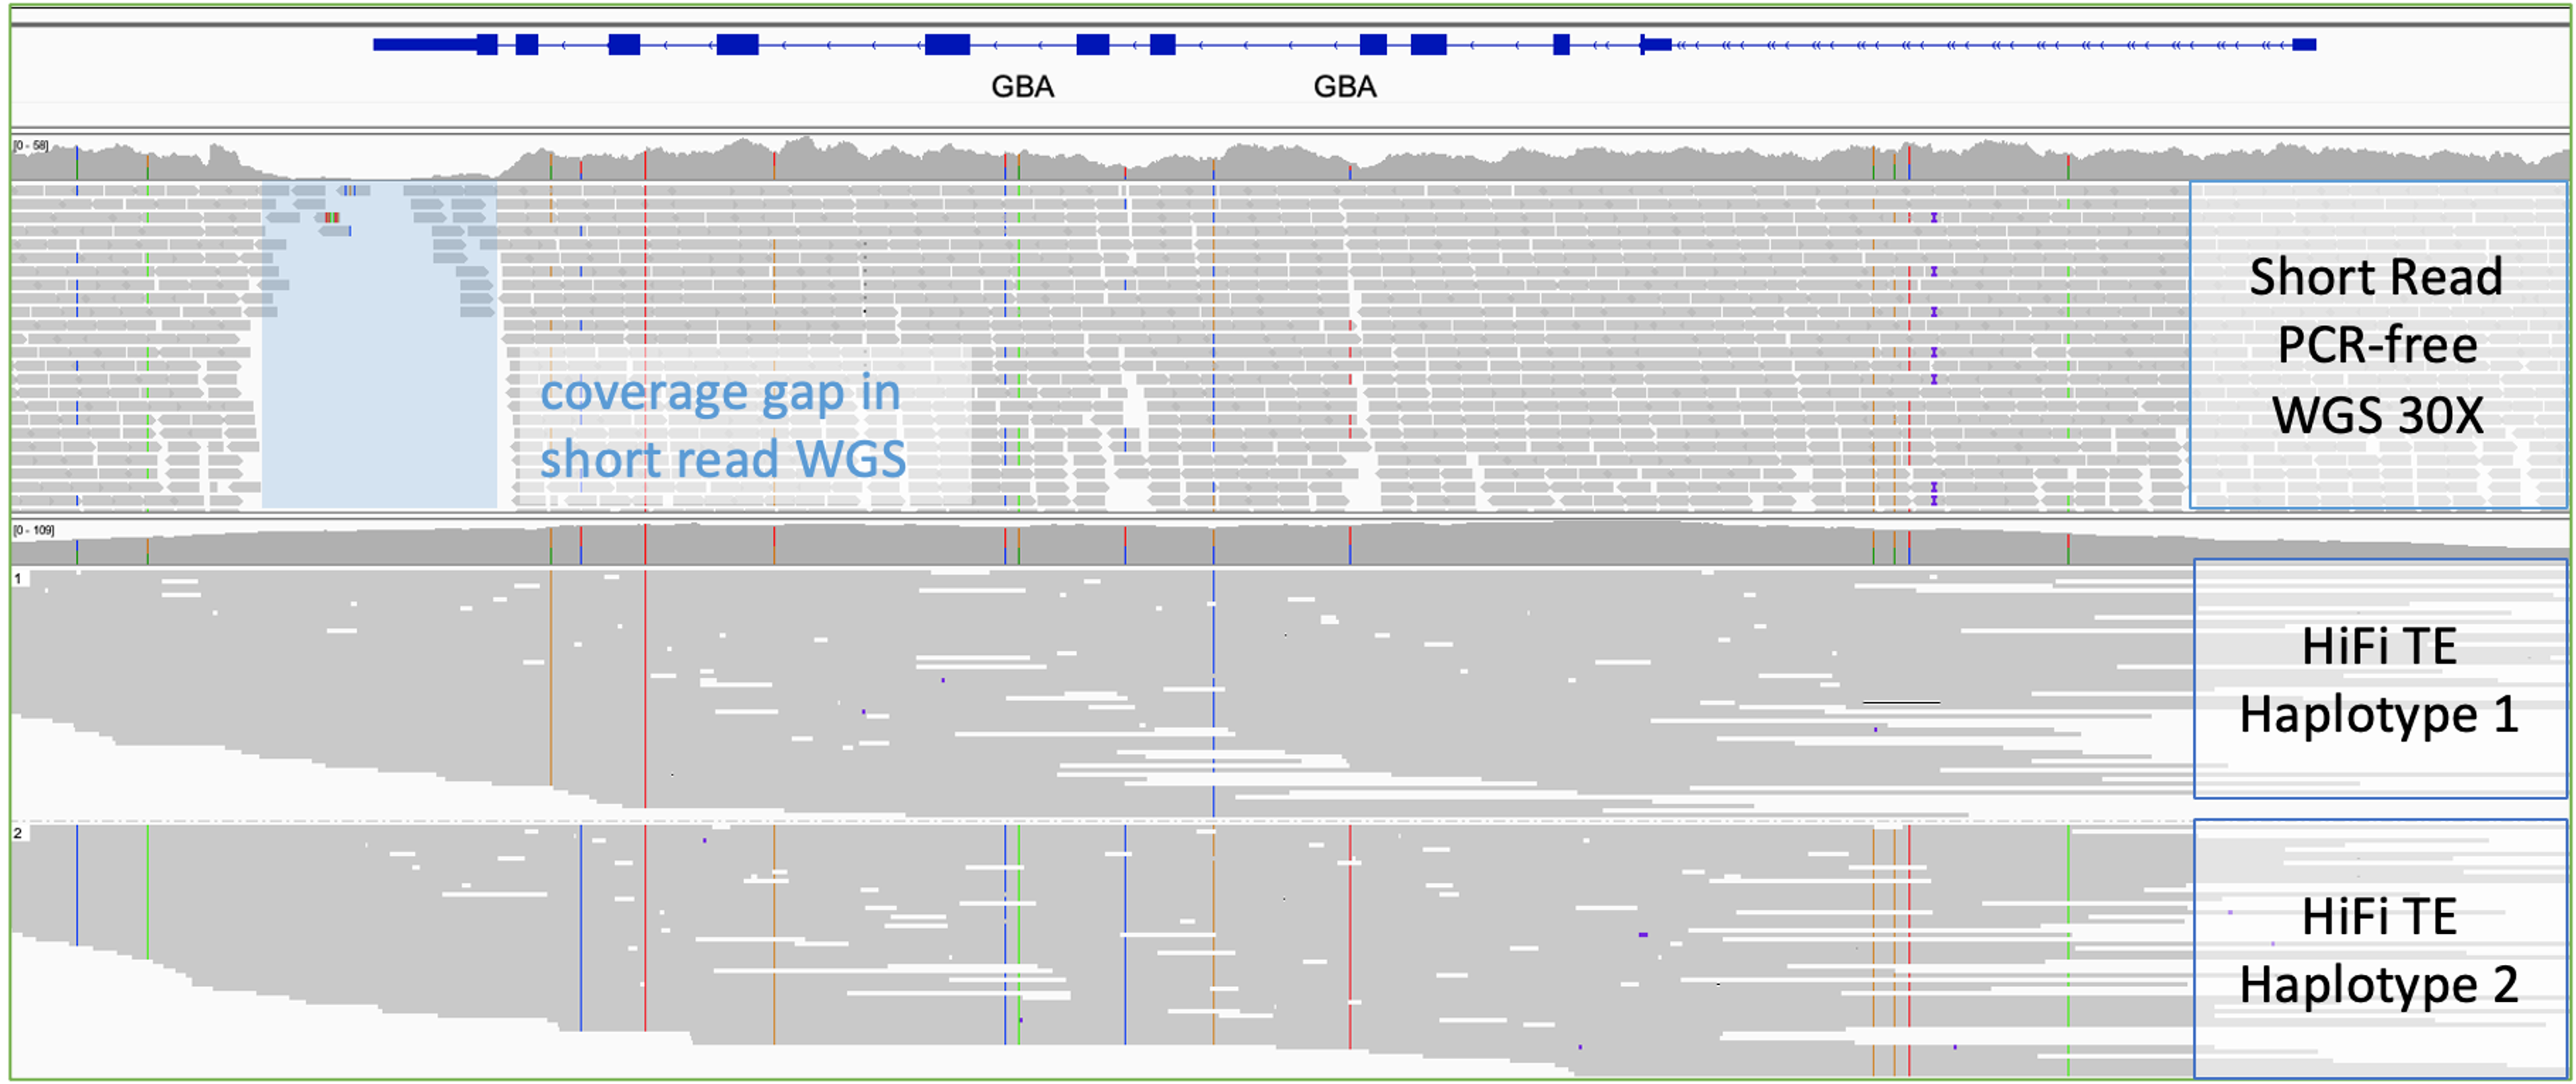 Full-gene phasing and no coverage gap in the GBA gene